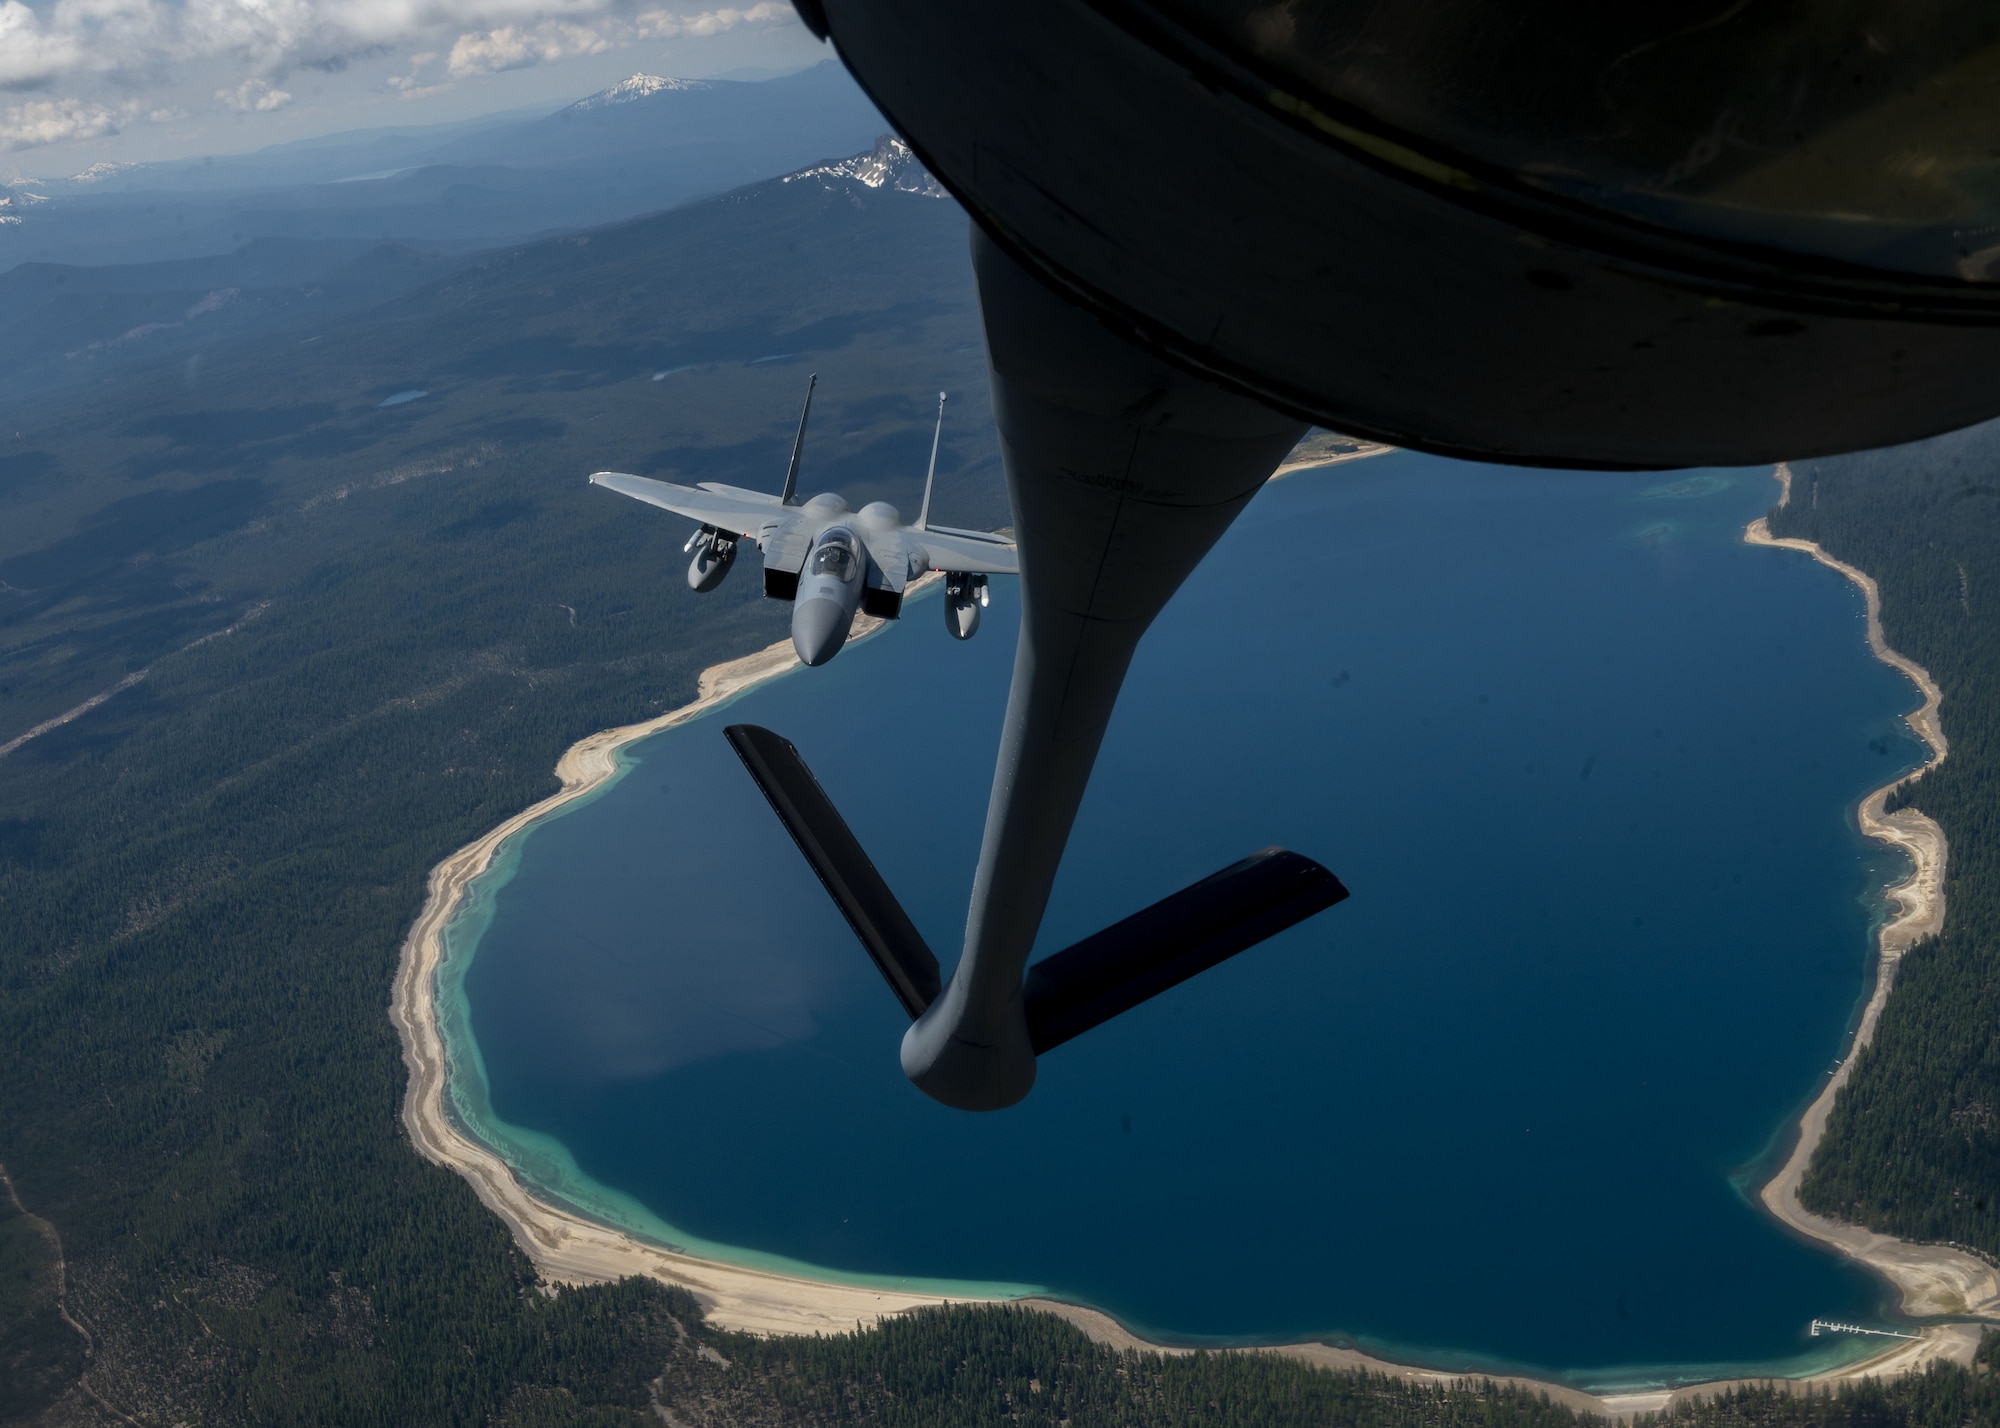 A KC-135 Stratotanker assigned to assigned to Fairchild Air Force Base, Washington, prepares to refuel an F-15C Eagle over Oregon as part of Operation Centennial Contact June 27, 2023. The movement, which also included flights over Yellowstone National Park, Mount Rushmore and Glacier National Park, was part of Air Mobility Command’s celebration of 100 years air refueling operations and demonstrated the 92nd Air Refueling Wing’s global reach capabilities. Since its inception in 1923, air refueling has become a crucial component of military and civilian aviation operations around the world by extending the range and endurance of aircraft and enabling them to complete missions that would otherwise be impossible or require multiple stops. As a result, this capability is essential for strategic and tactical operations, as well as humanitarian relief efforts in support of AMC, U.S. Transportation Command and Department of Defense priorities. (U.S. Air Force photo by Staff Sgt. Lawrence Sena)